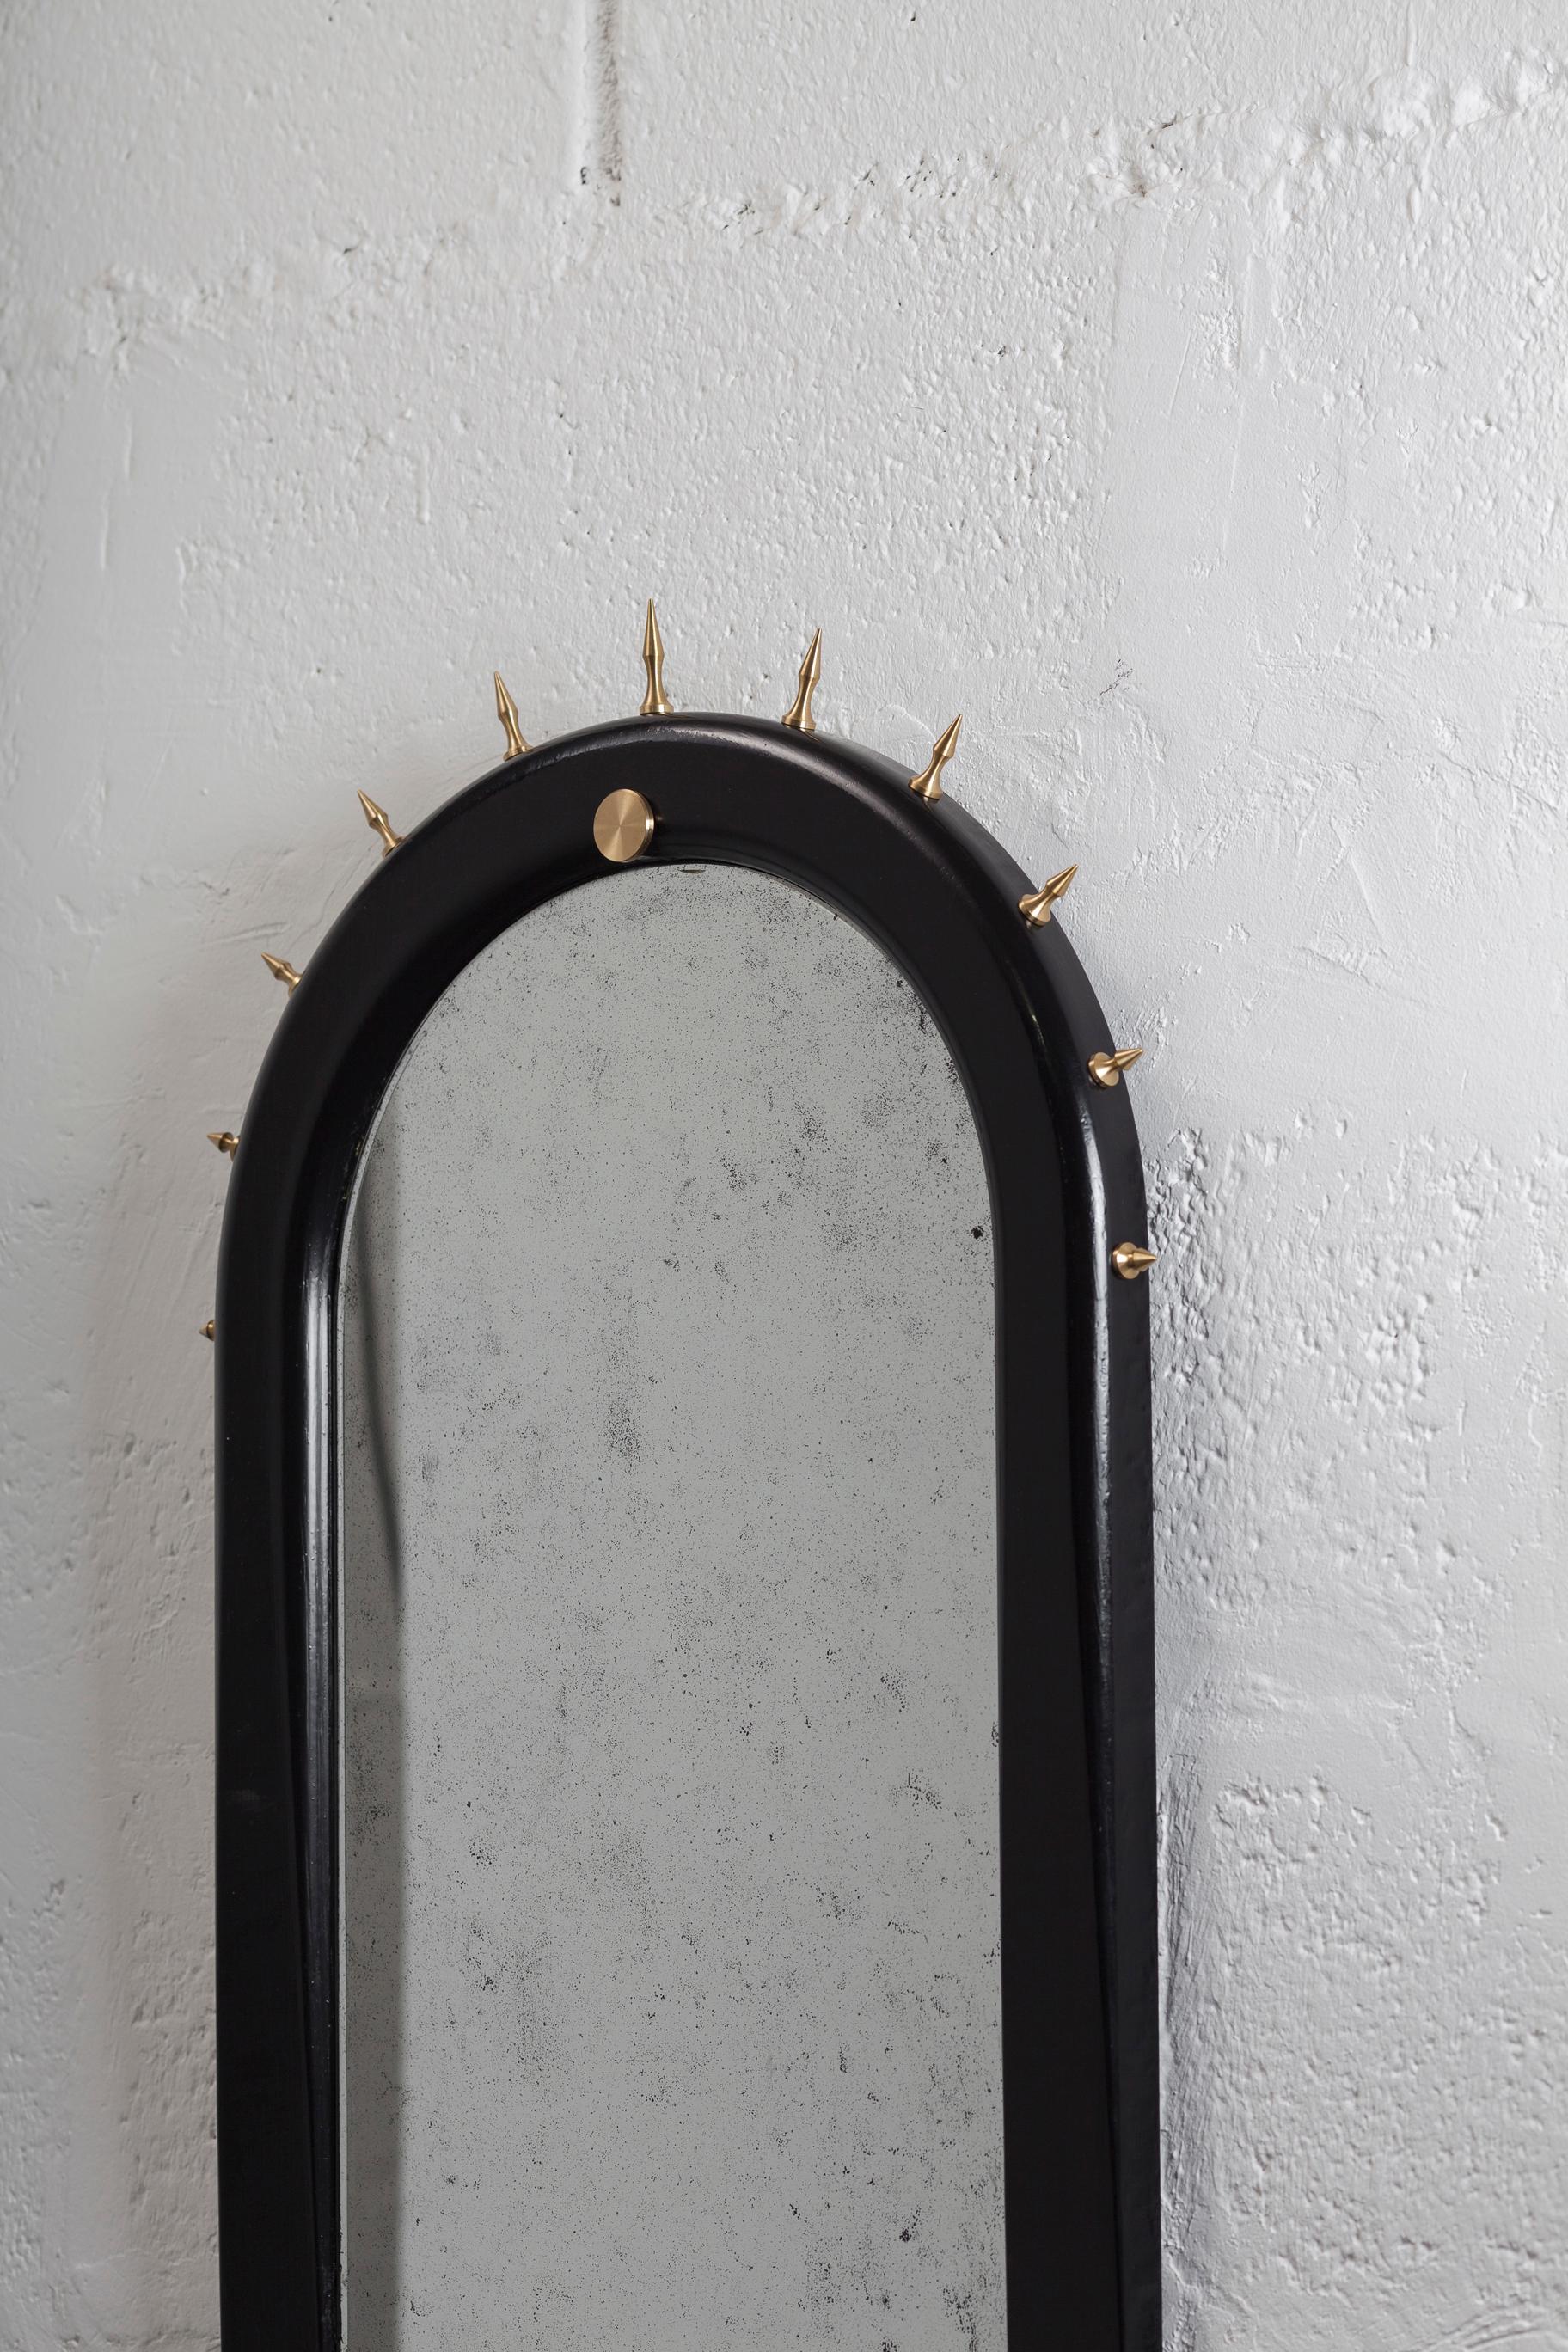 Bronze Sitiera_01 Wall Mirror in Solid Wood by ANDEAN, Represented by Tuleste Factory For Sale